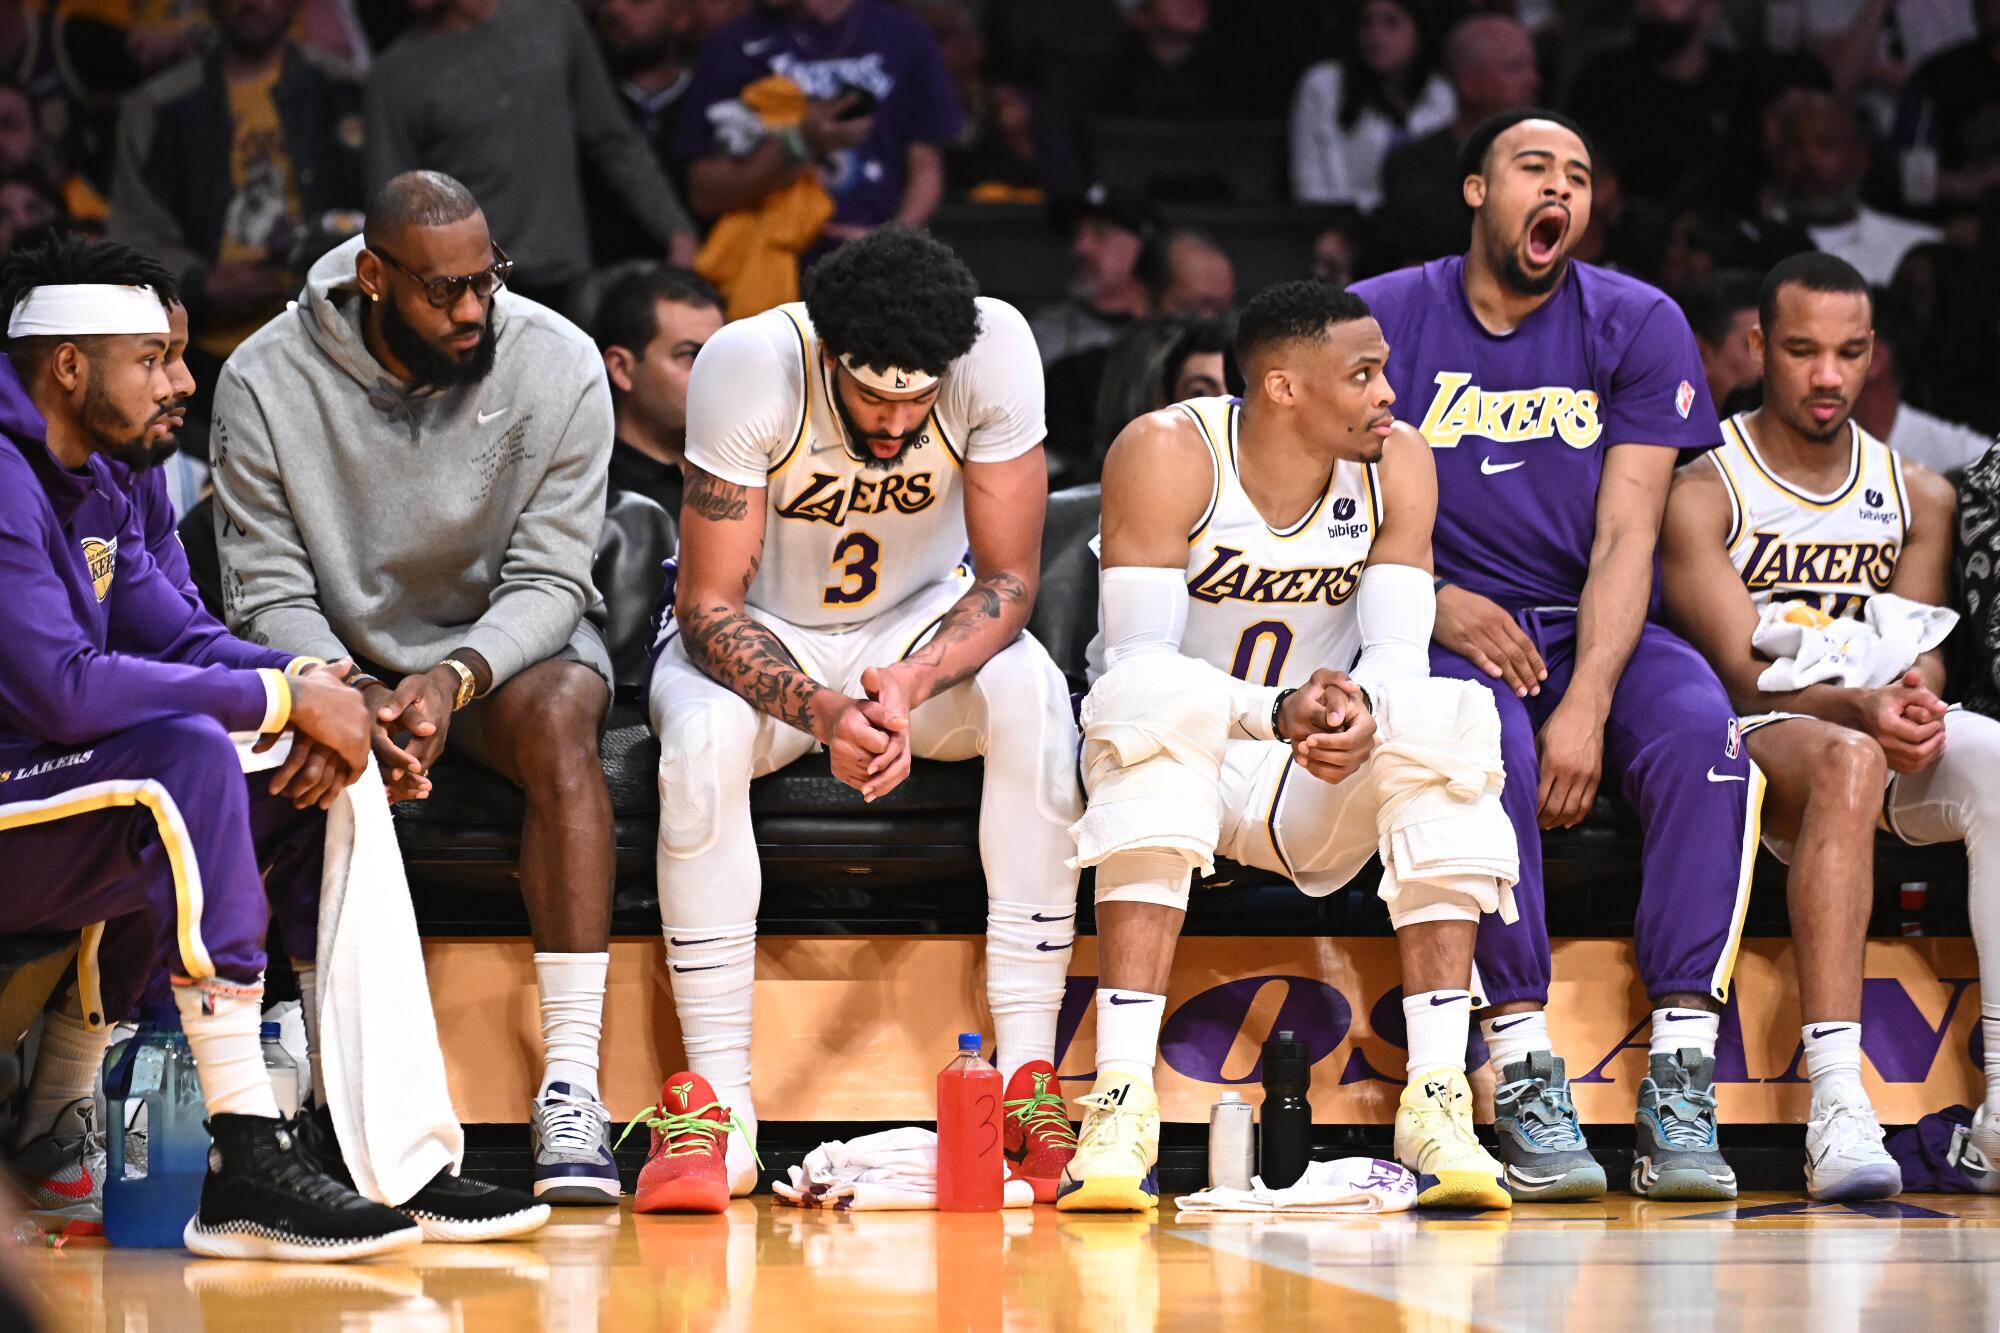 Lakers players sit on the bench late in the game against the Nuggets.